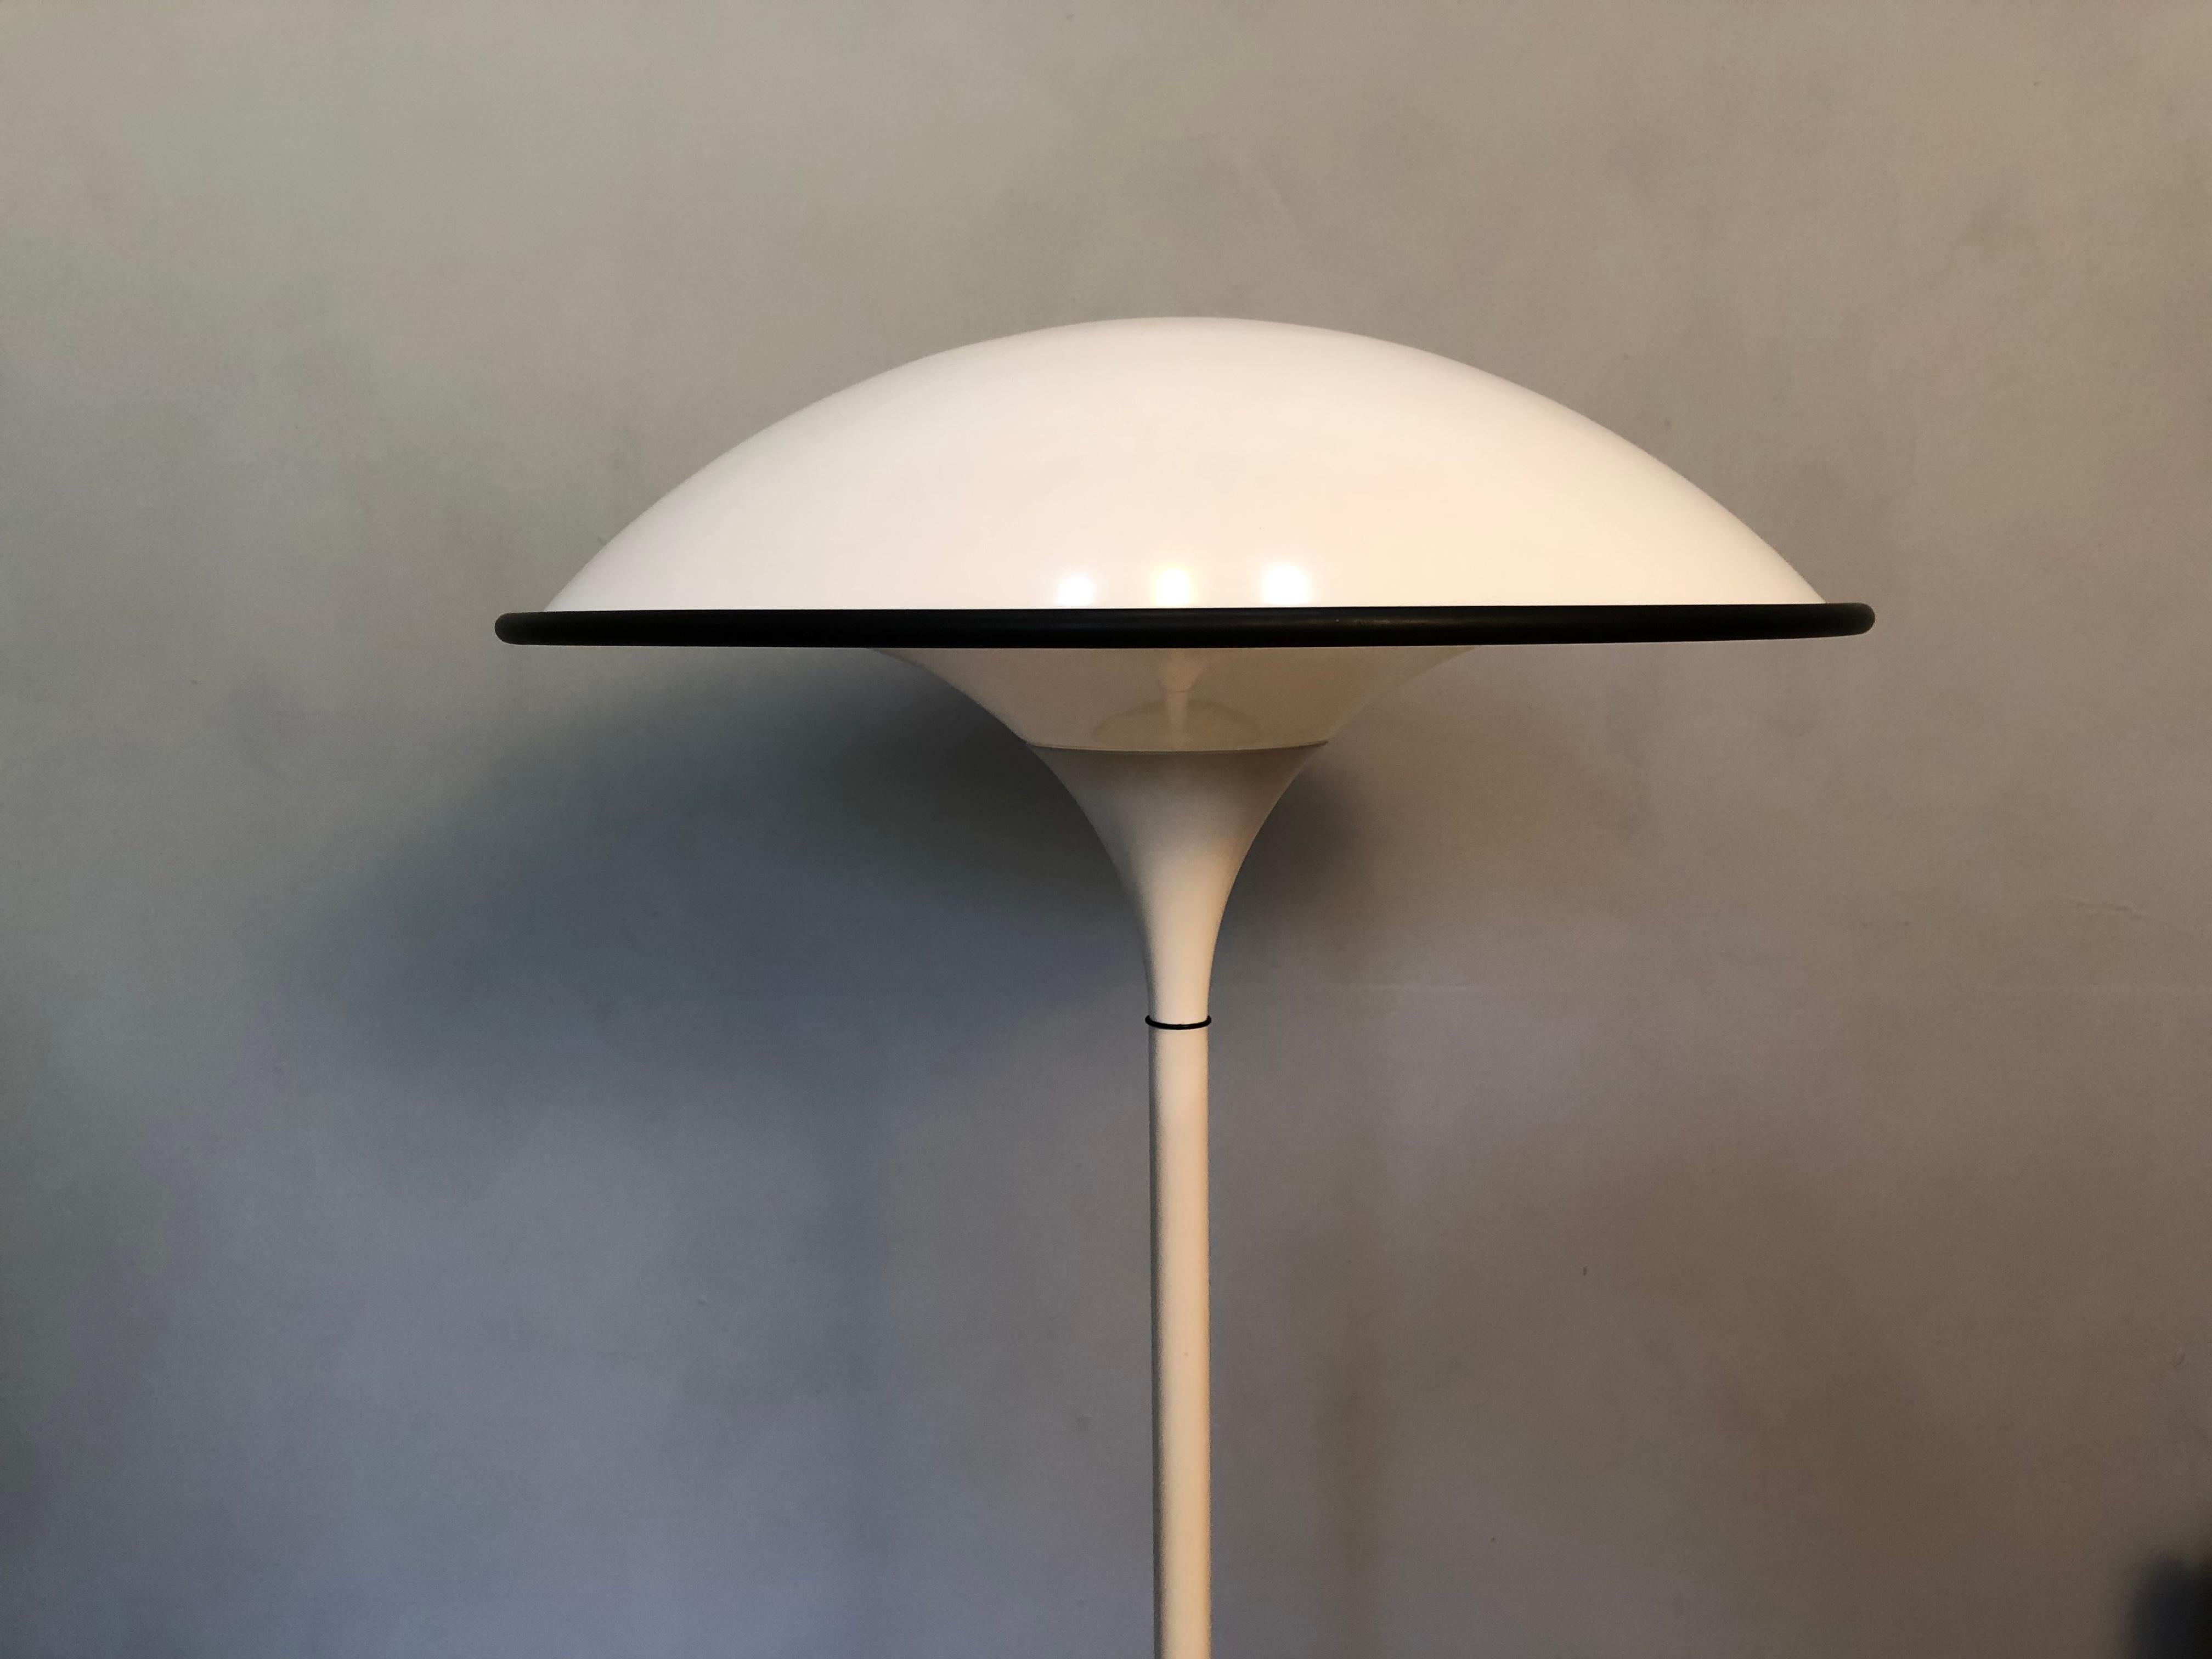 Danish cosmos floor lamp designed by Preben Jacobsen for Fog & Mørup, 1984. Wonderful Space Age design. On/off button located at the top of the tulip stem. Fully rewired. In lovely condition.